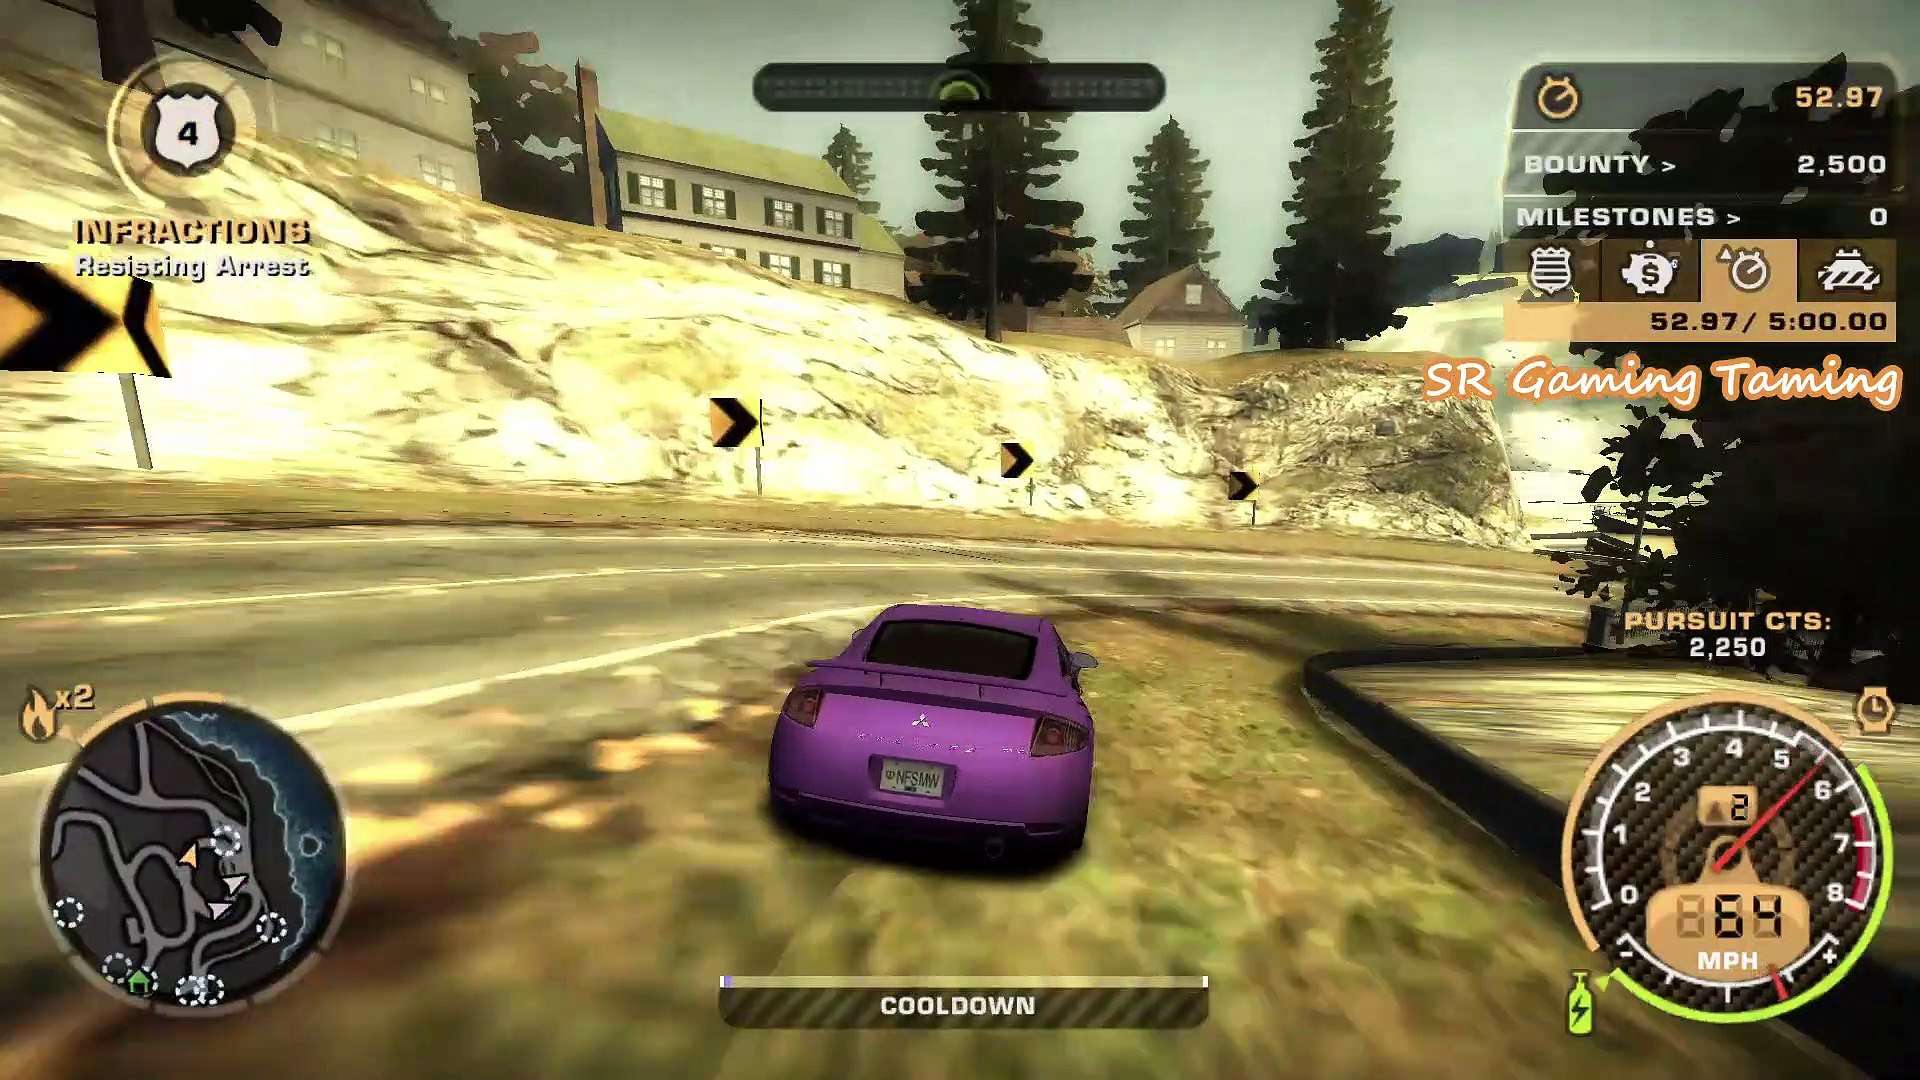 NFS: Most Wanted (2005), Software